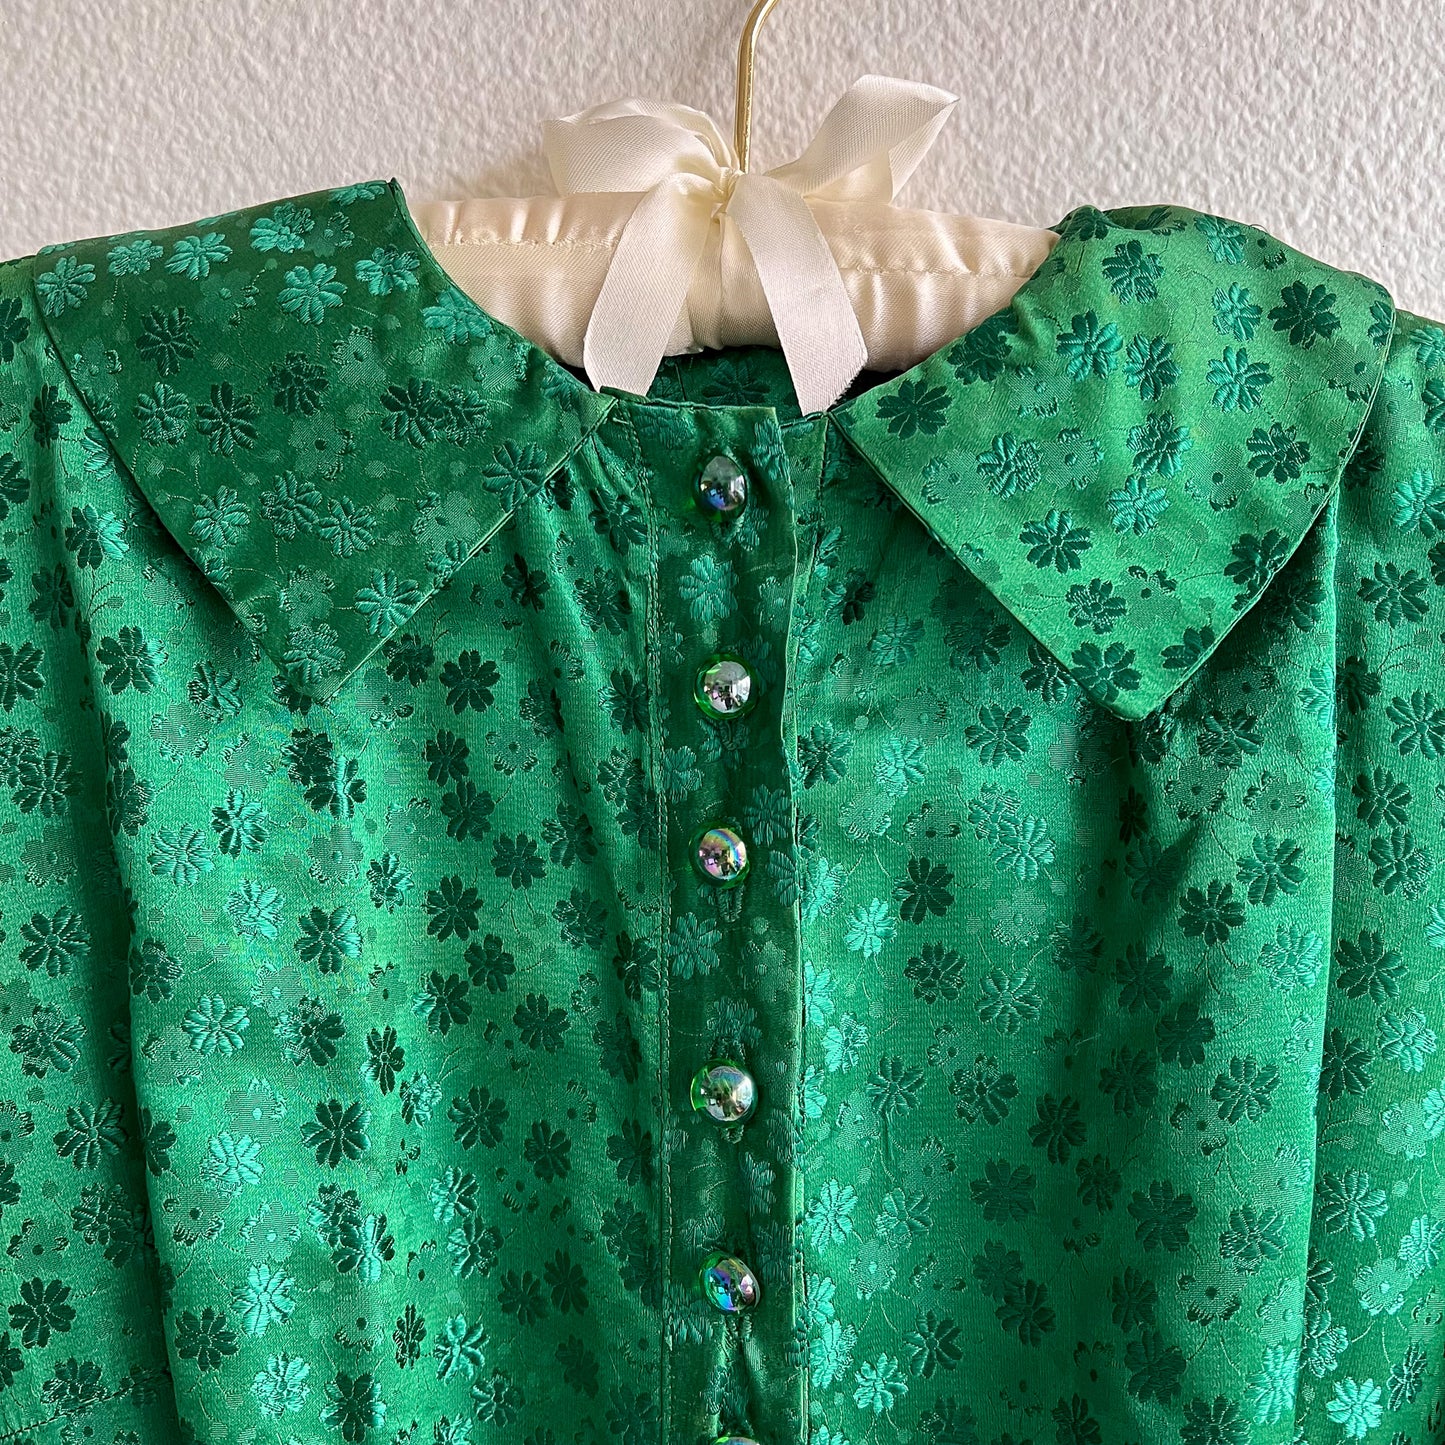 Glamorous 1950s Emerald Green Silk Dress With Glass Buttons (XS)